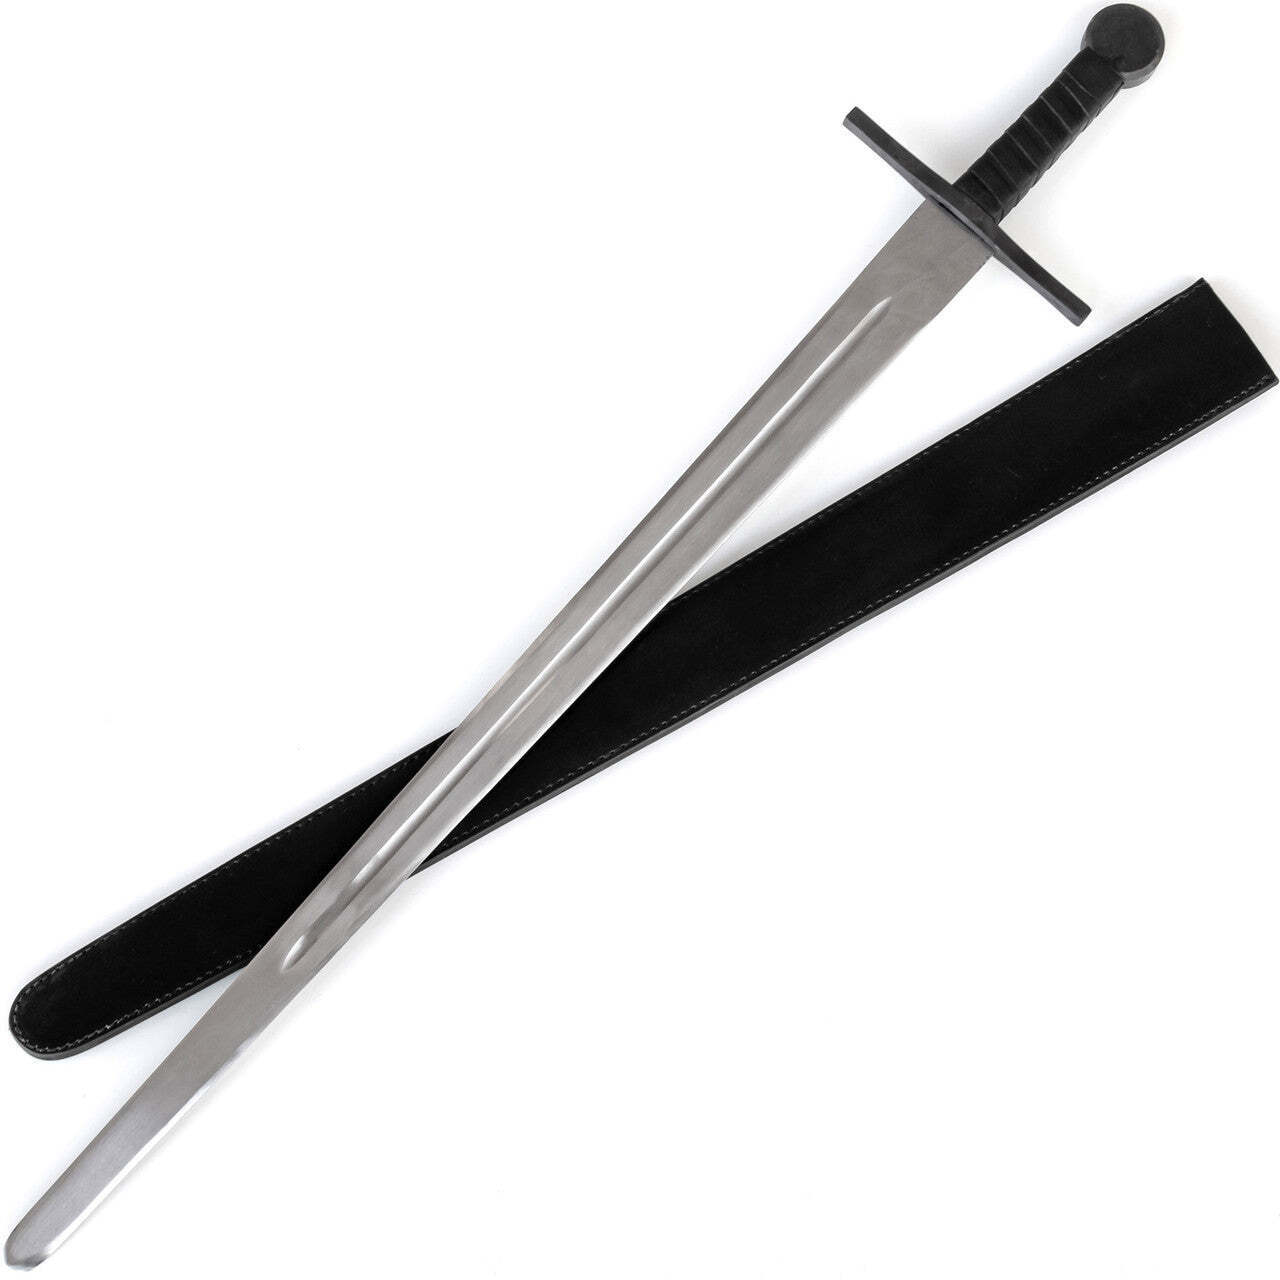 Black Knight Heavy Duty Sparring Sword Forged for Intense Battle Training Craft